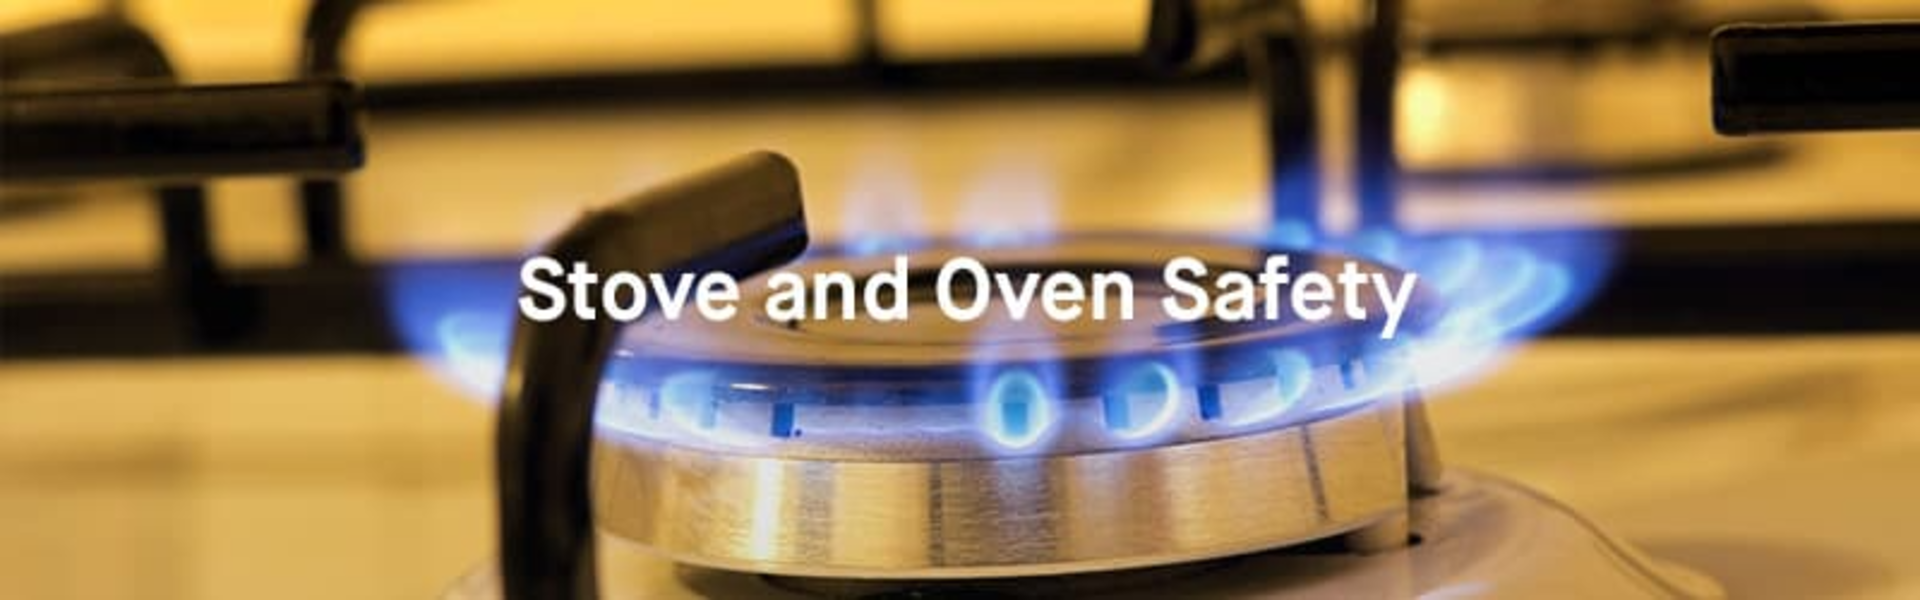 stove oven safety